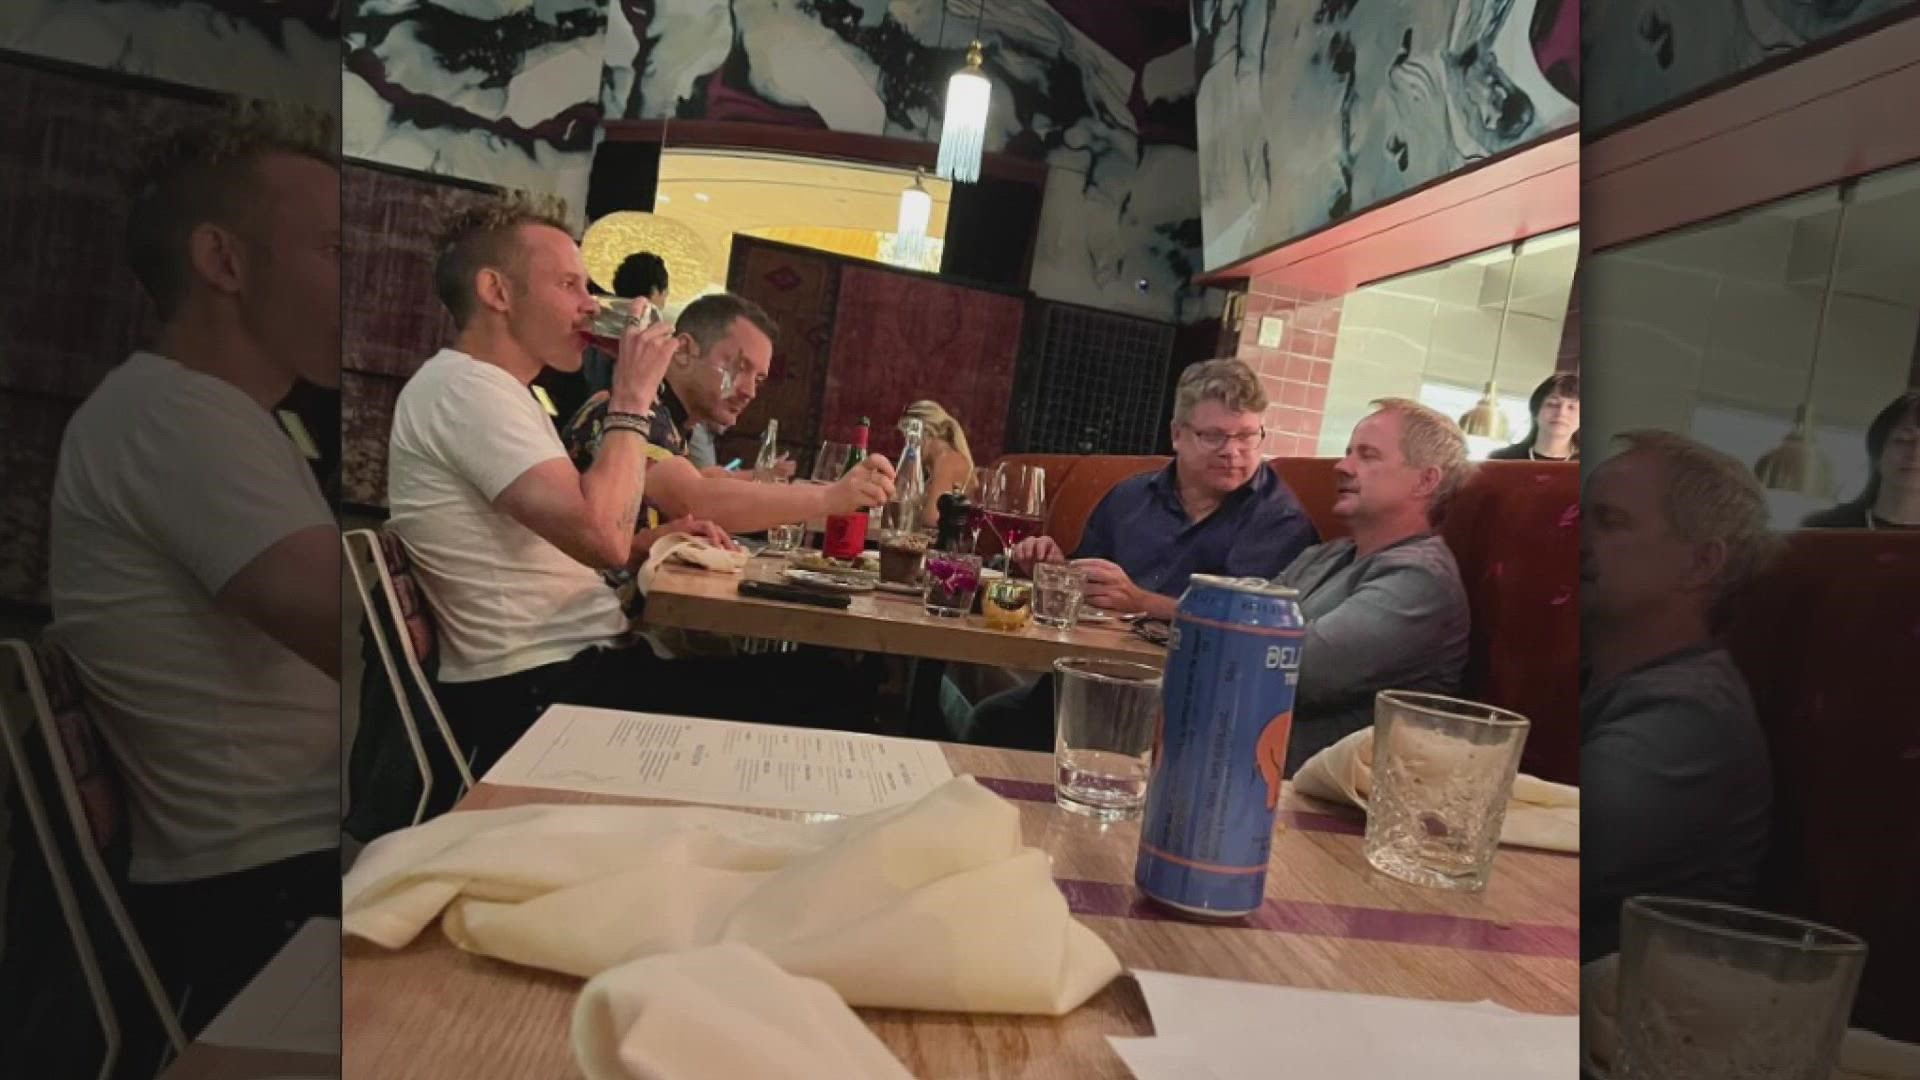 The actors were in Denver last weekend for Fan Expo. A fan seated next to them at a restaurant managed to pull off an epic photobomb.